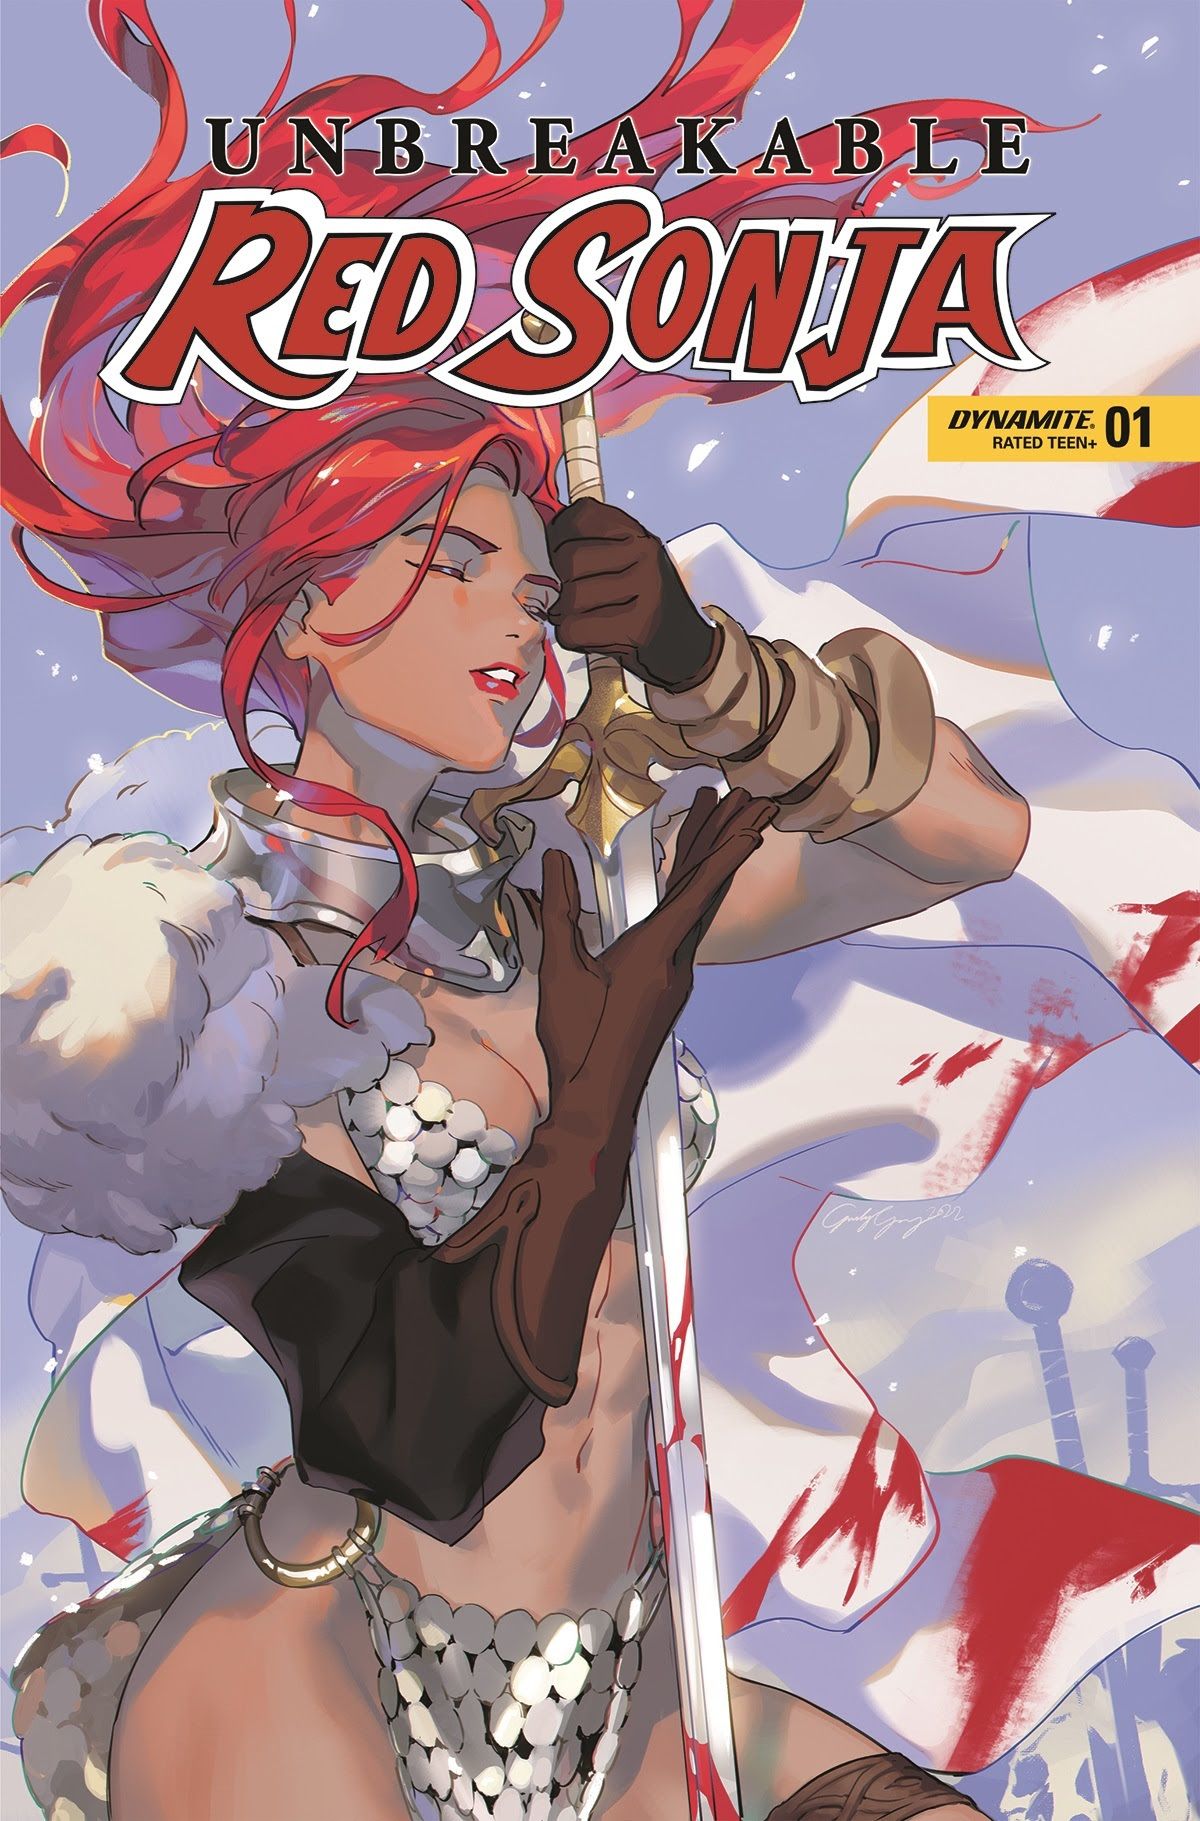 Red Sonja Celebrates 50 Year With an Unbreakable Solo Series From Jim Zub